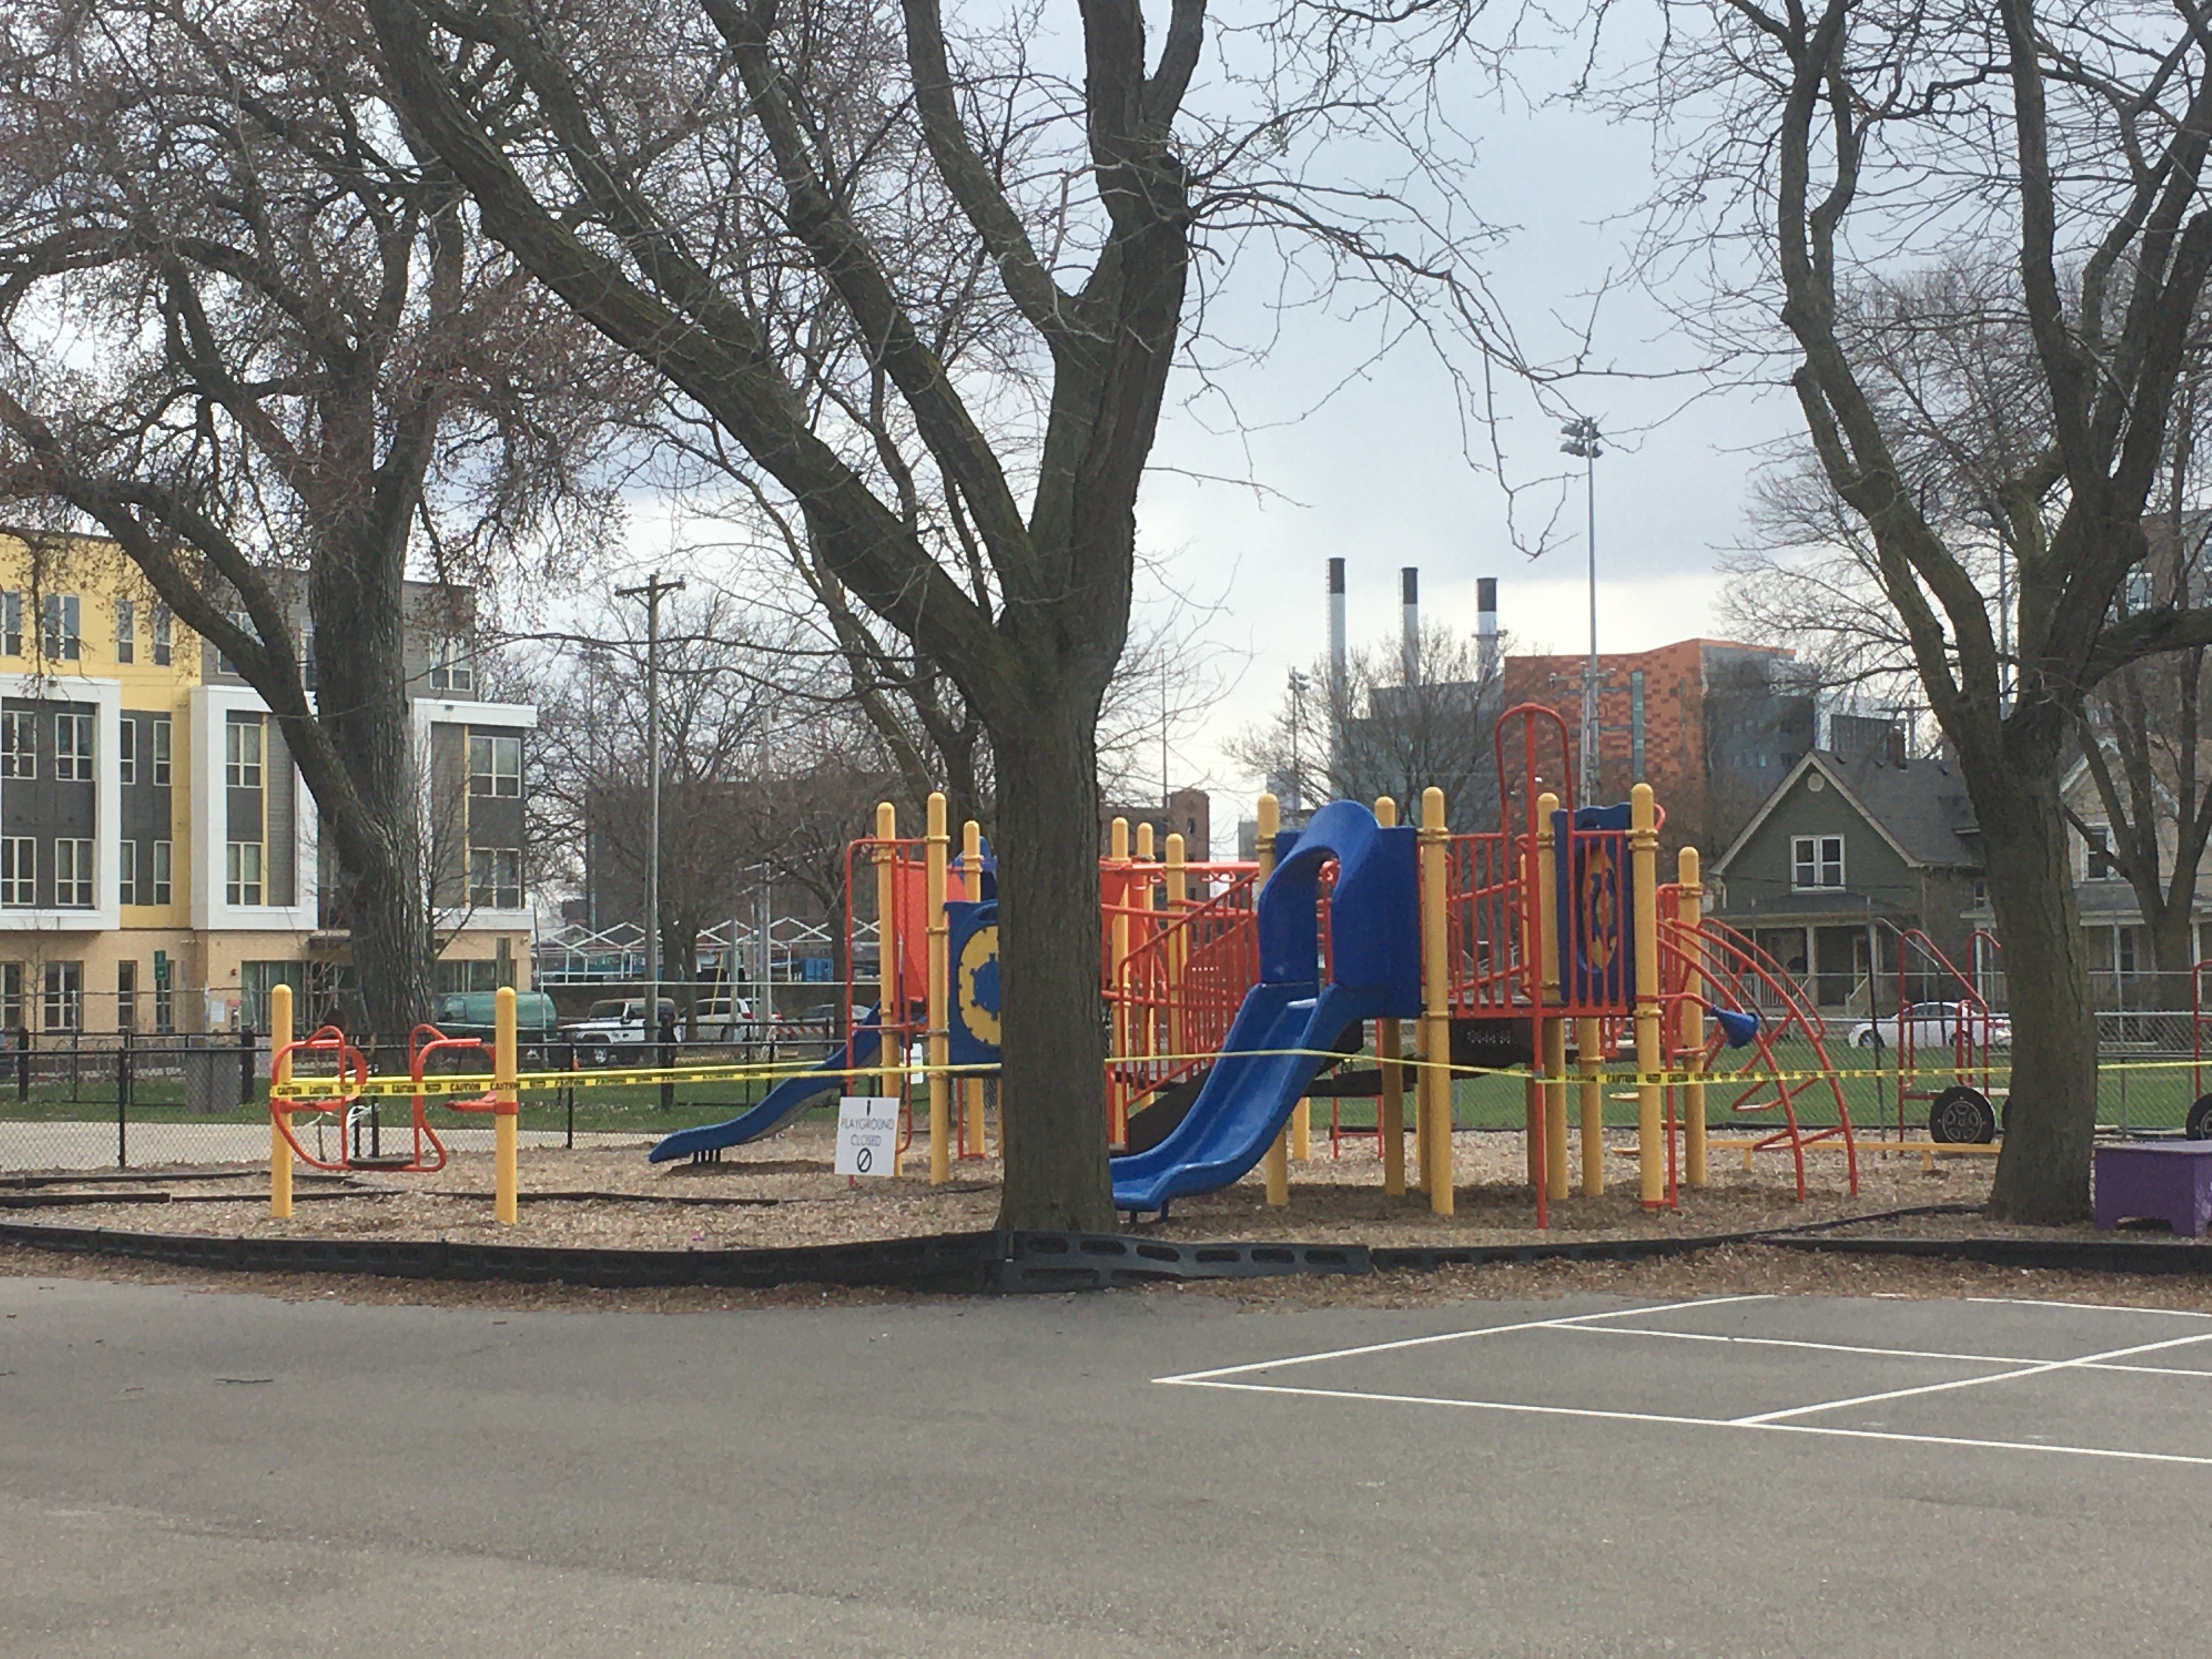 Lapham Elementary School playground closed due to Safer at Home, 2020